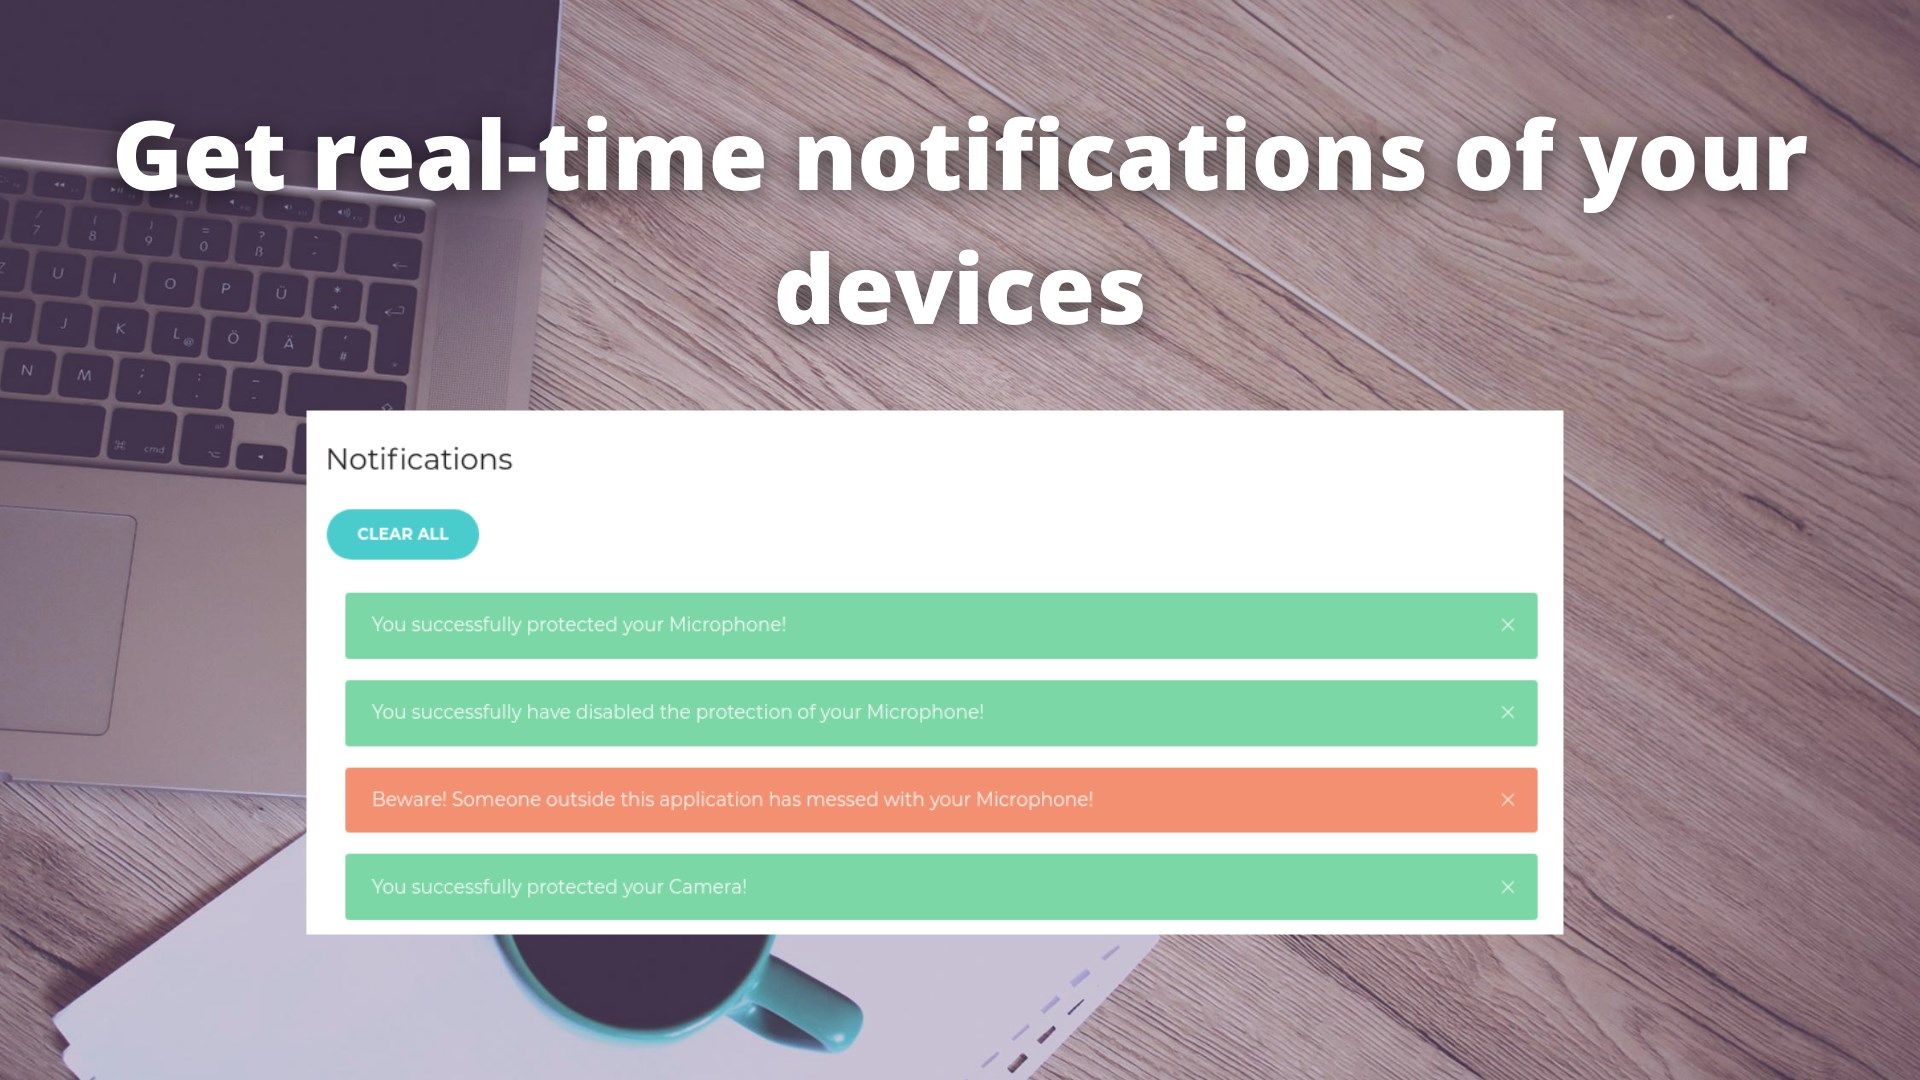 Notifications Panel.
Get real-time notifications on the device state changes and abnormal activities that were performed against your devices.